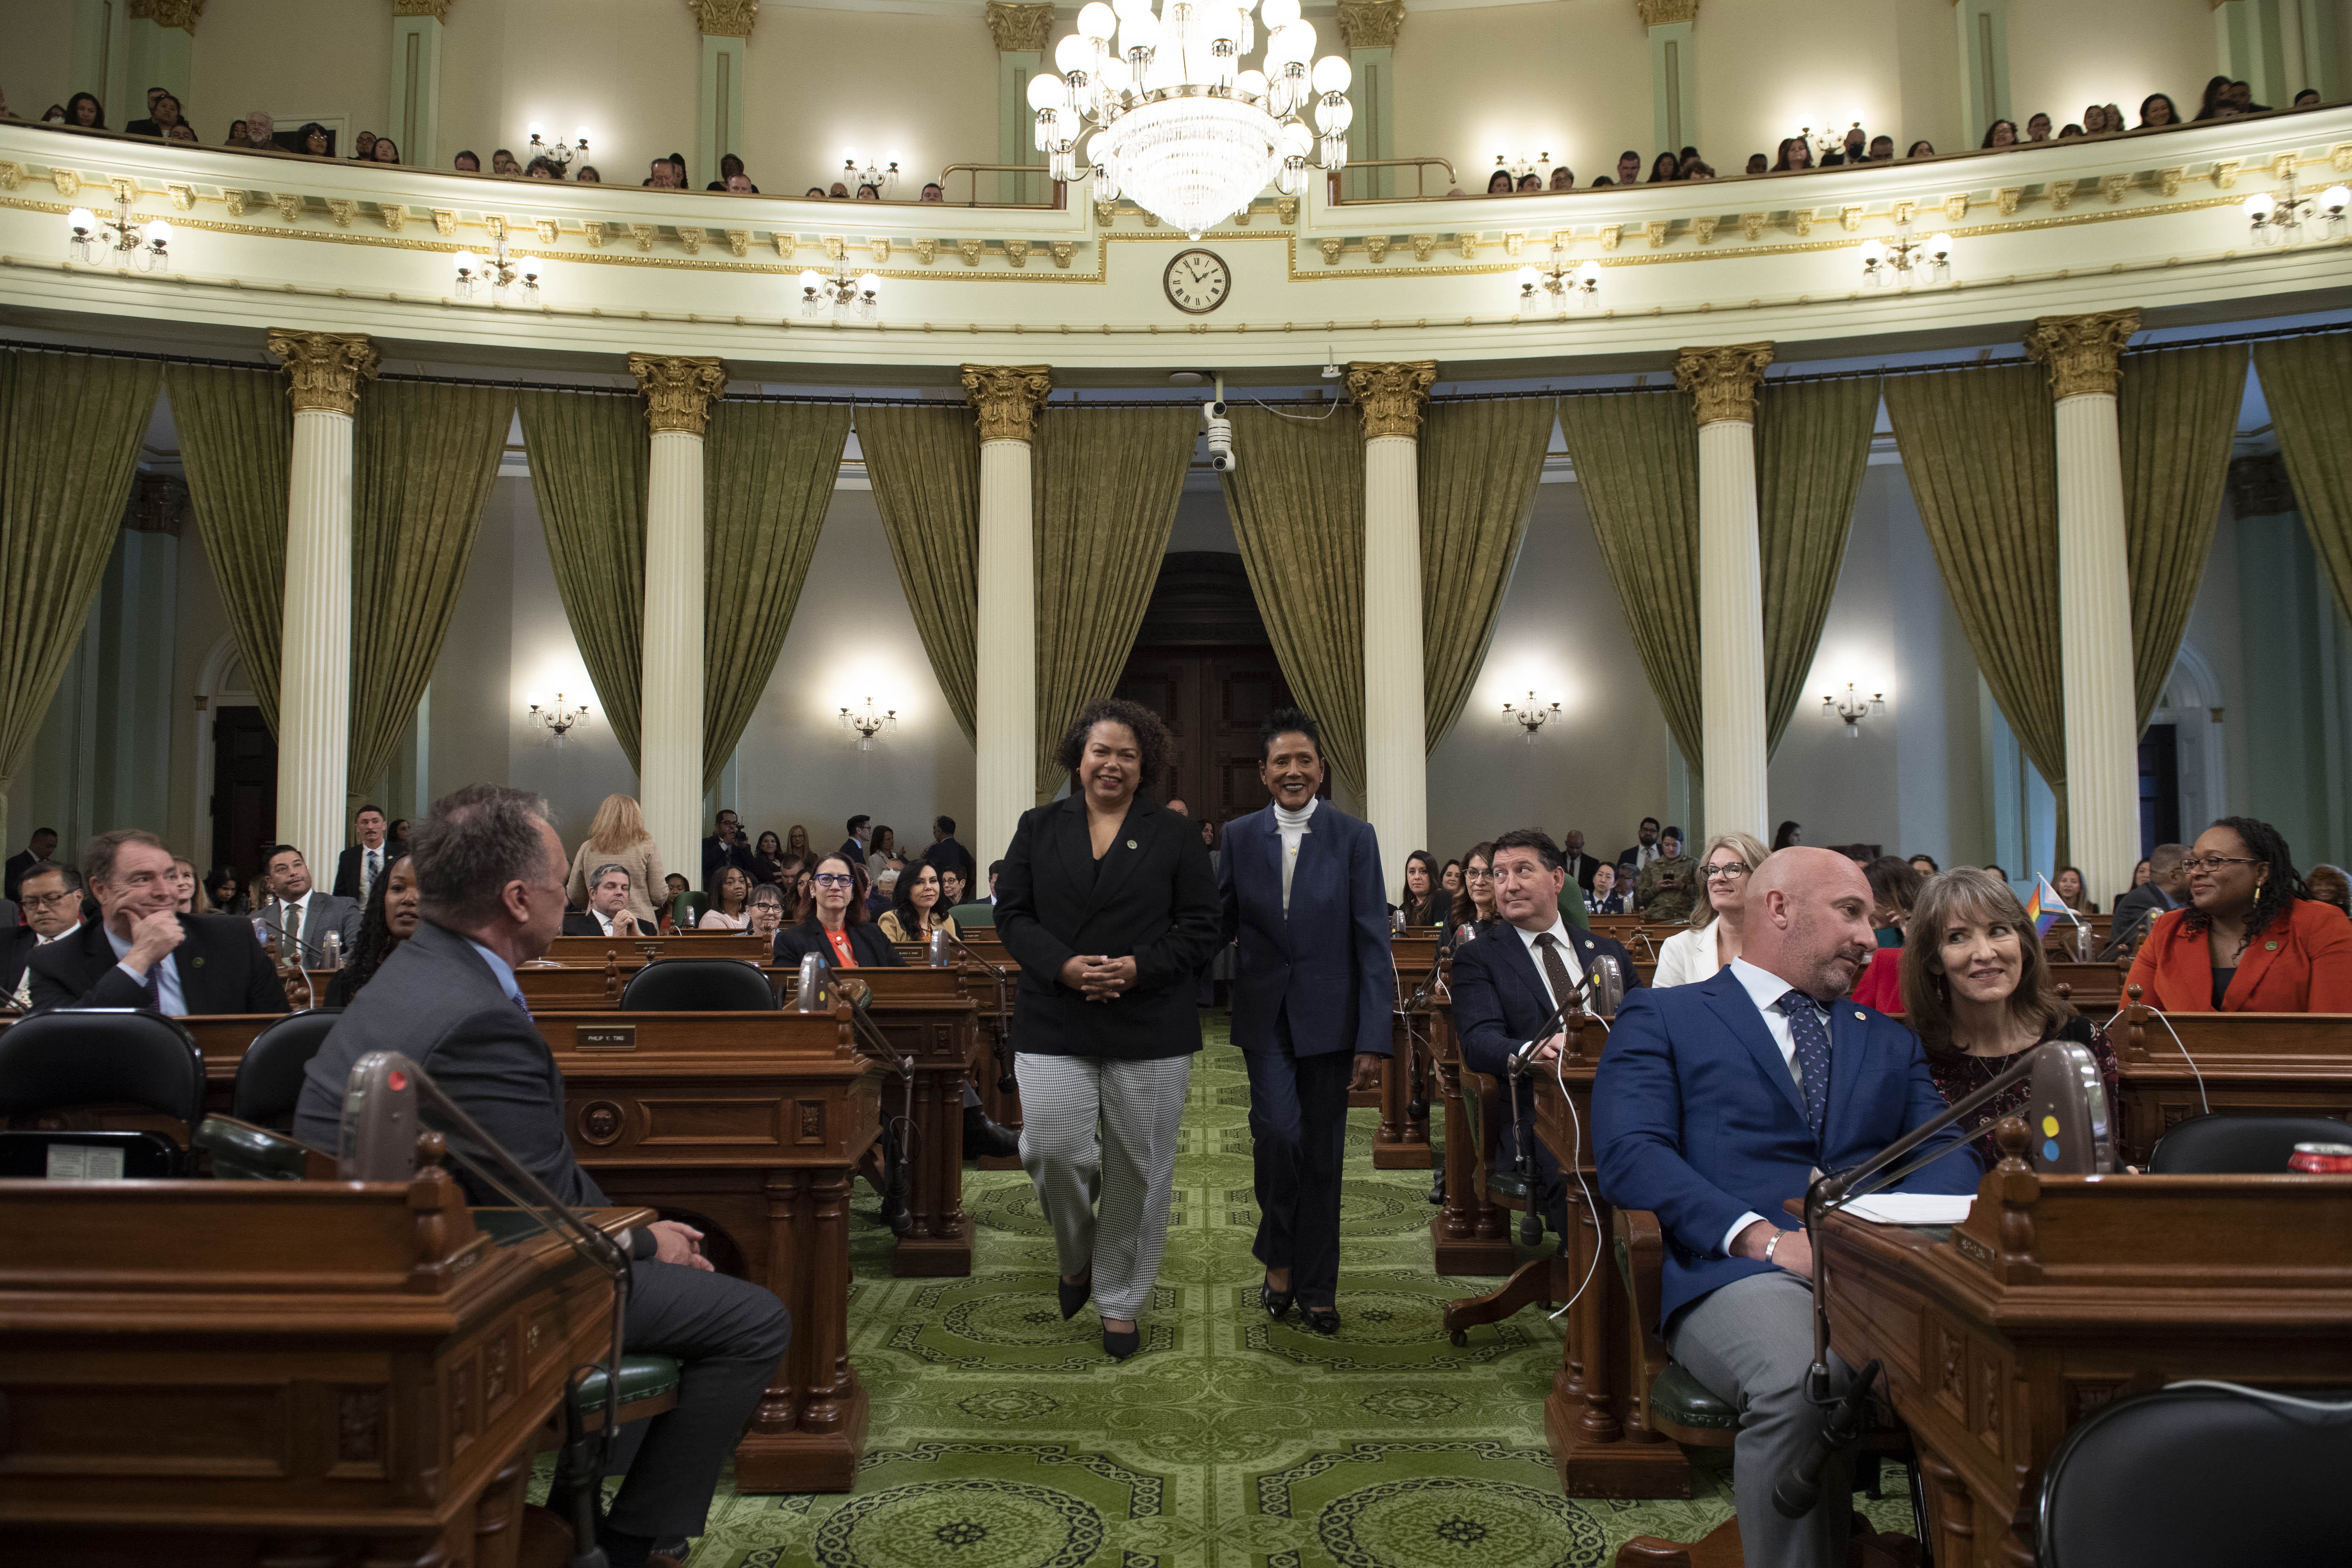 Assemblymember Bonta and Elaine Brown walk down the Assembly floor